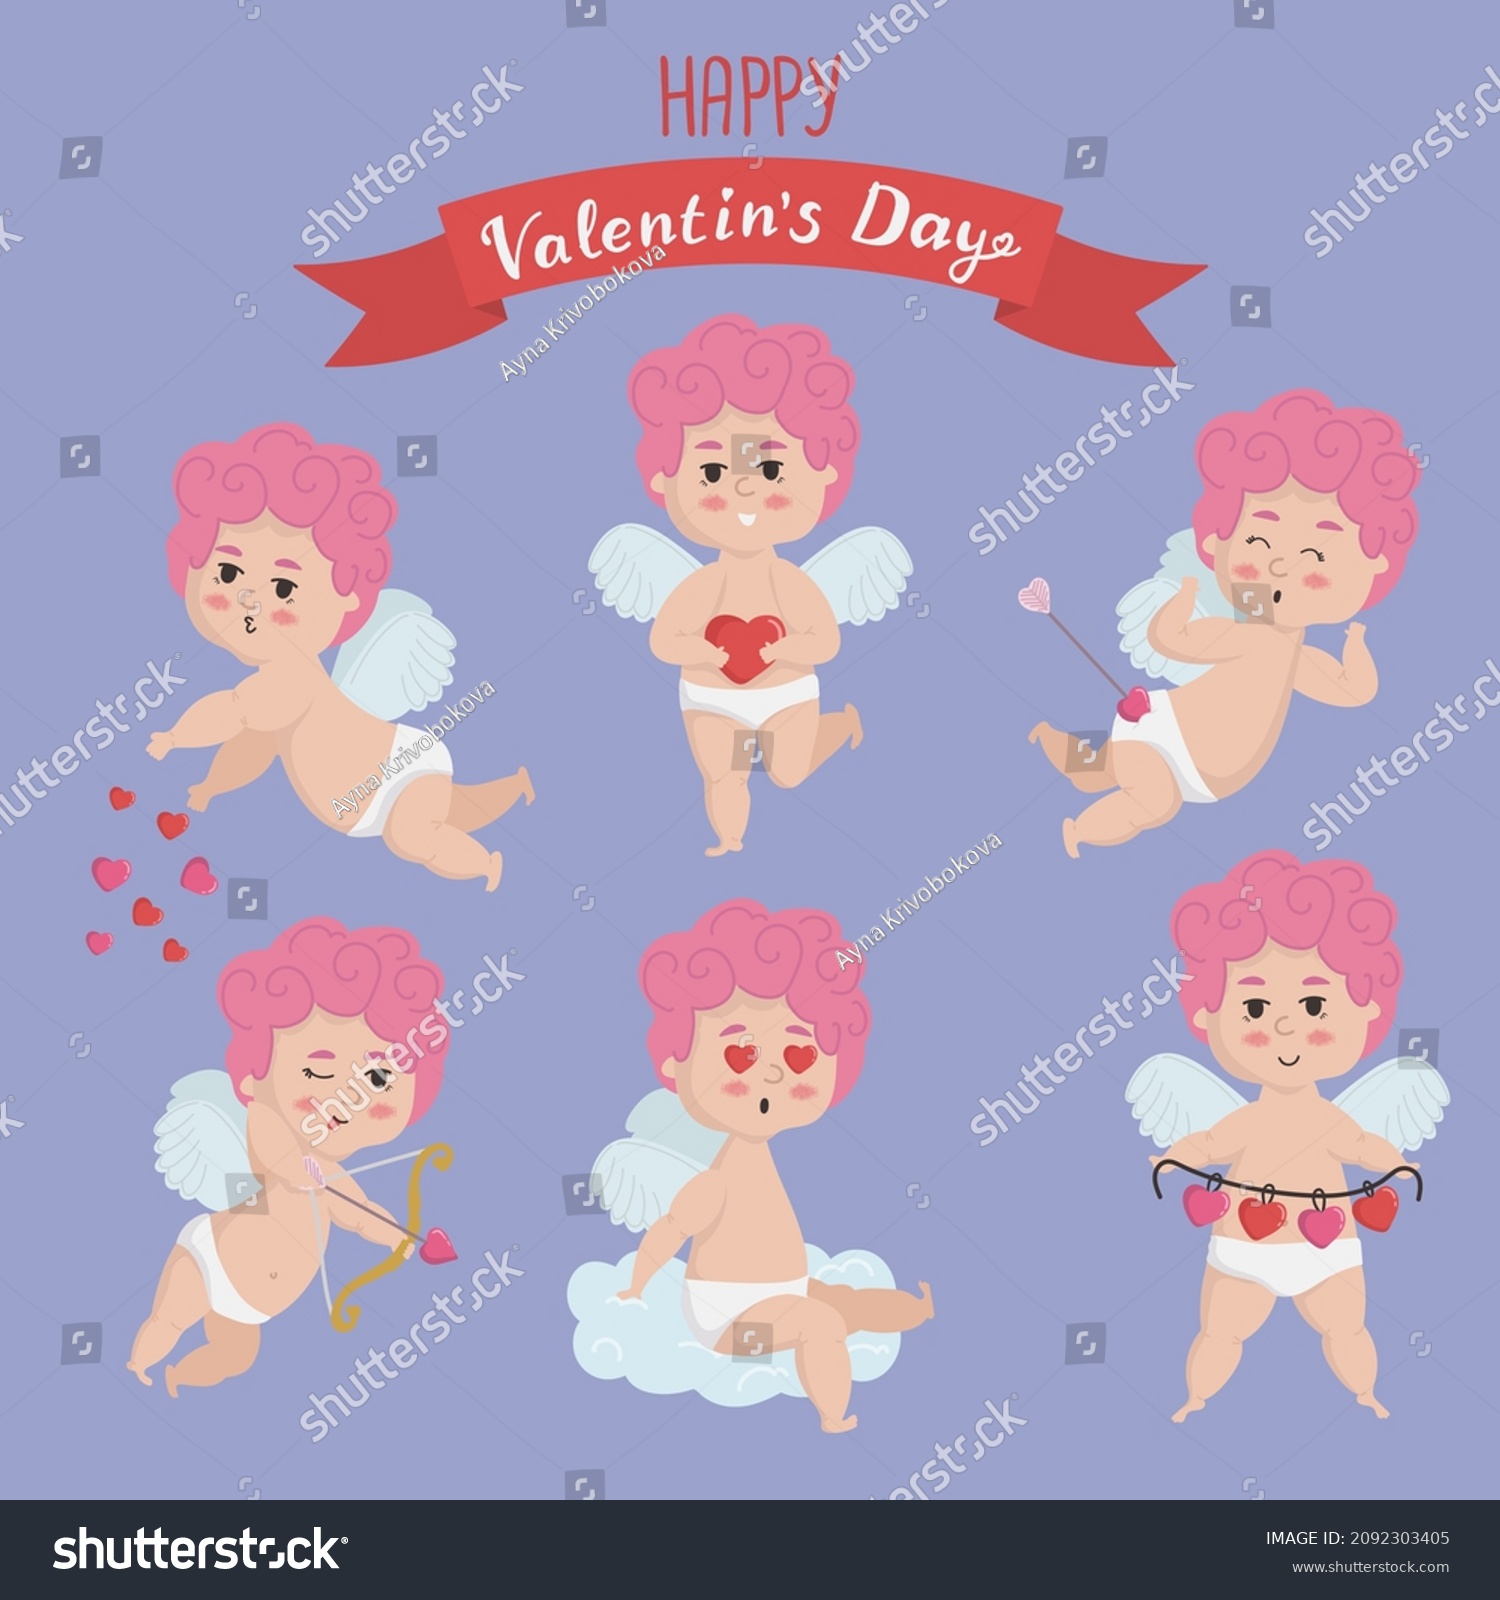 Vector Illustration Isolated Set Pinkhaired Cupid Stock Vector Royalty Free 2092303405 8253